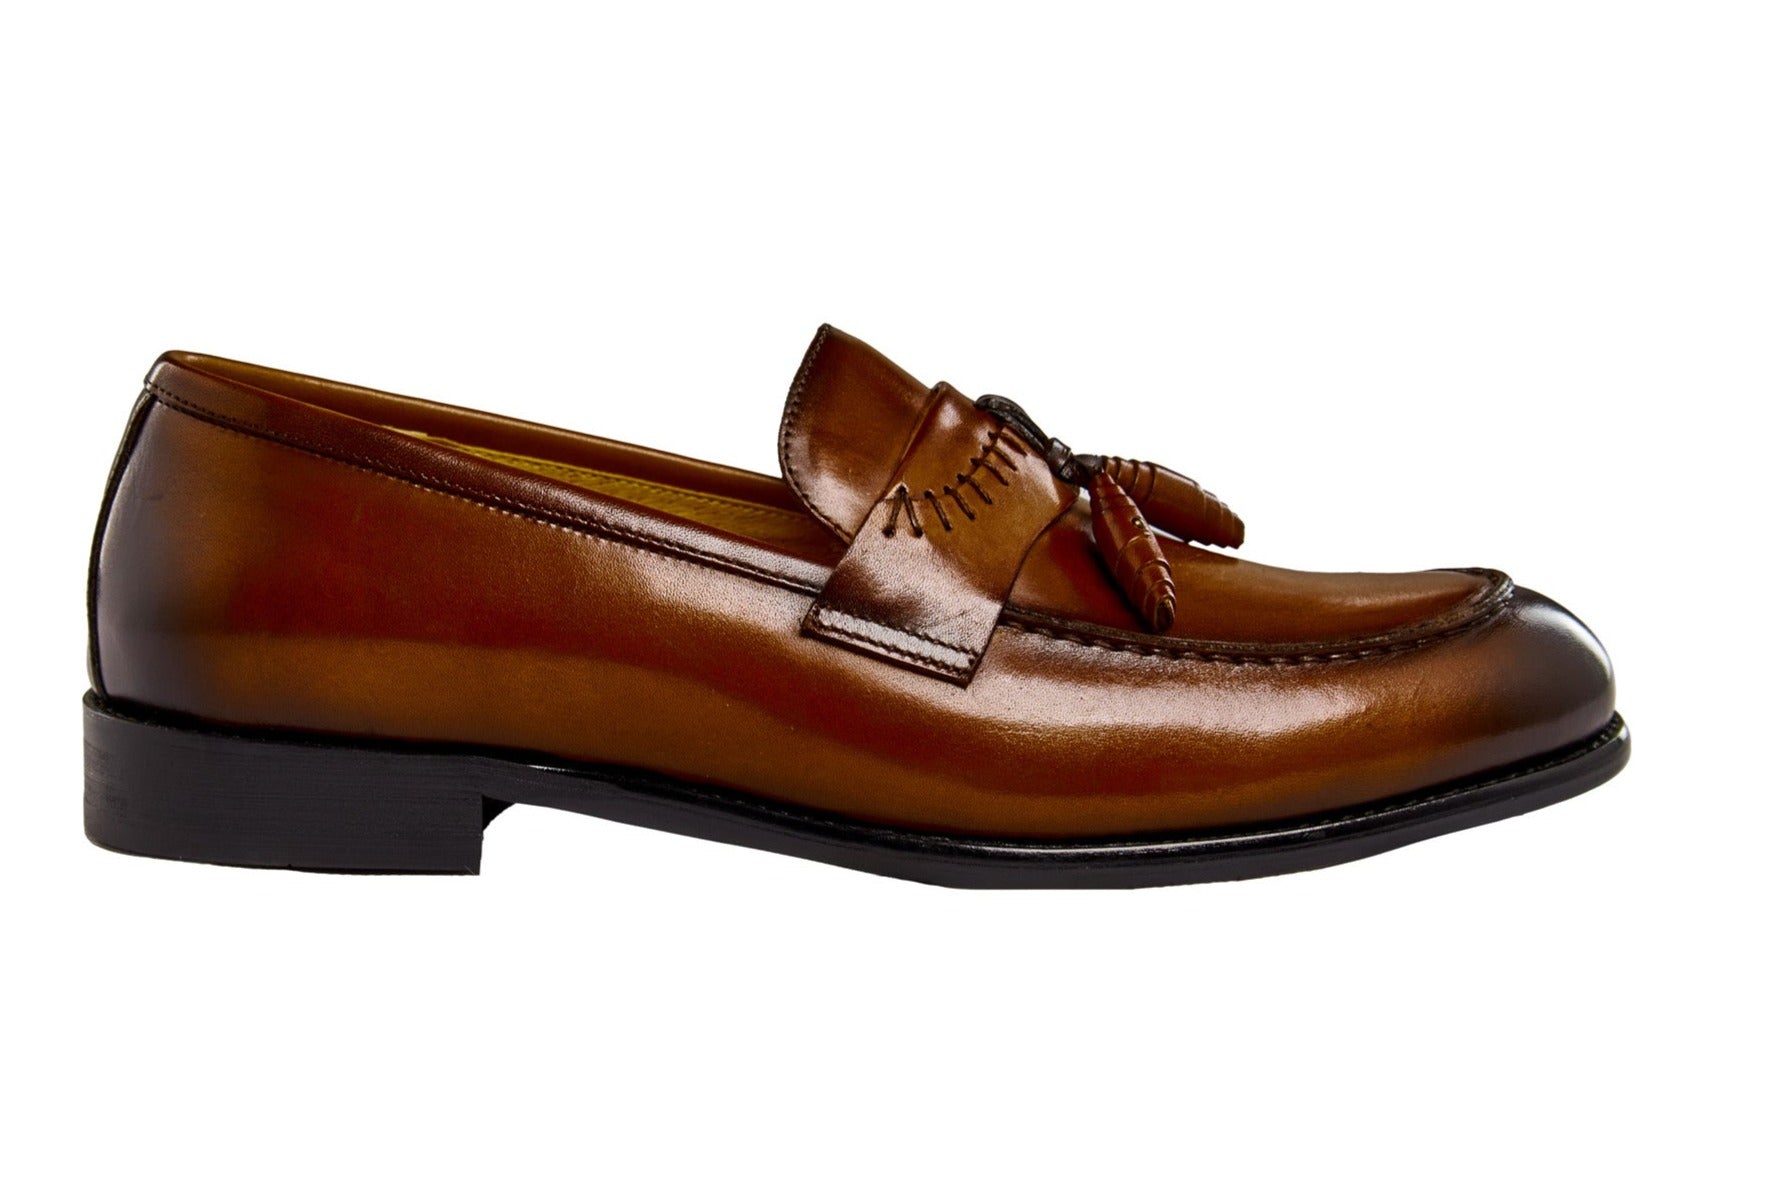 BROWN LEATHER TASSEL LOAFERS